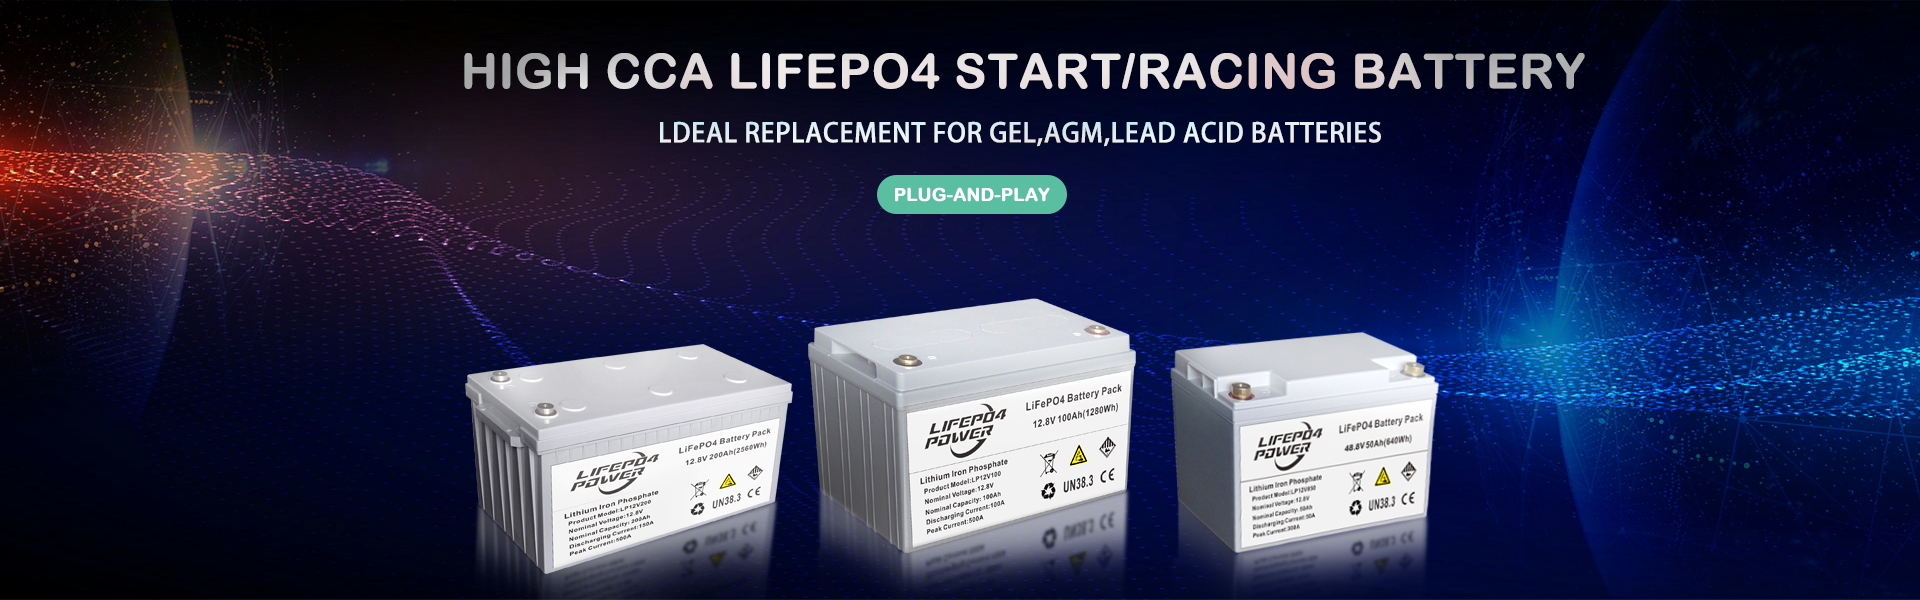 High CCA LiFePO4 Start / Racing Battery Plug-And-Play .Ideal remplacement for GEL, AGM, Batter Acid Lead